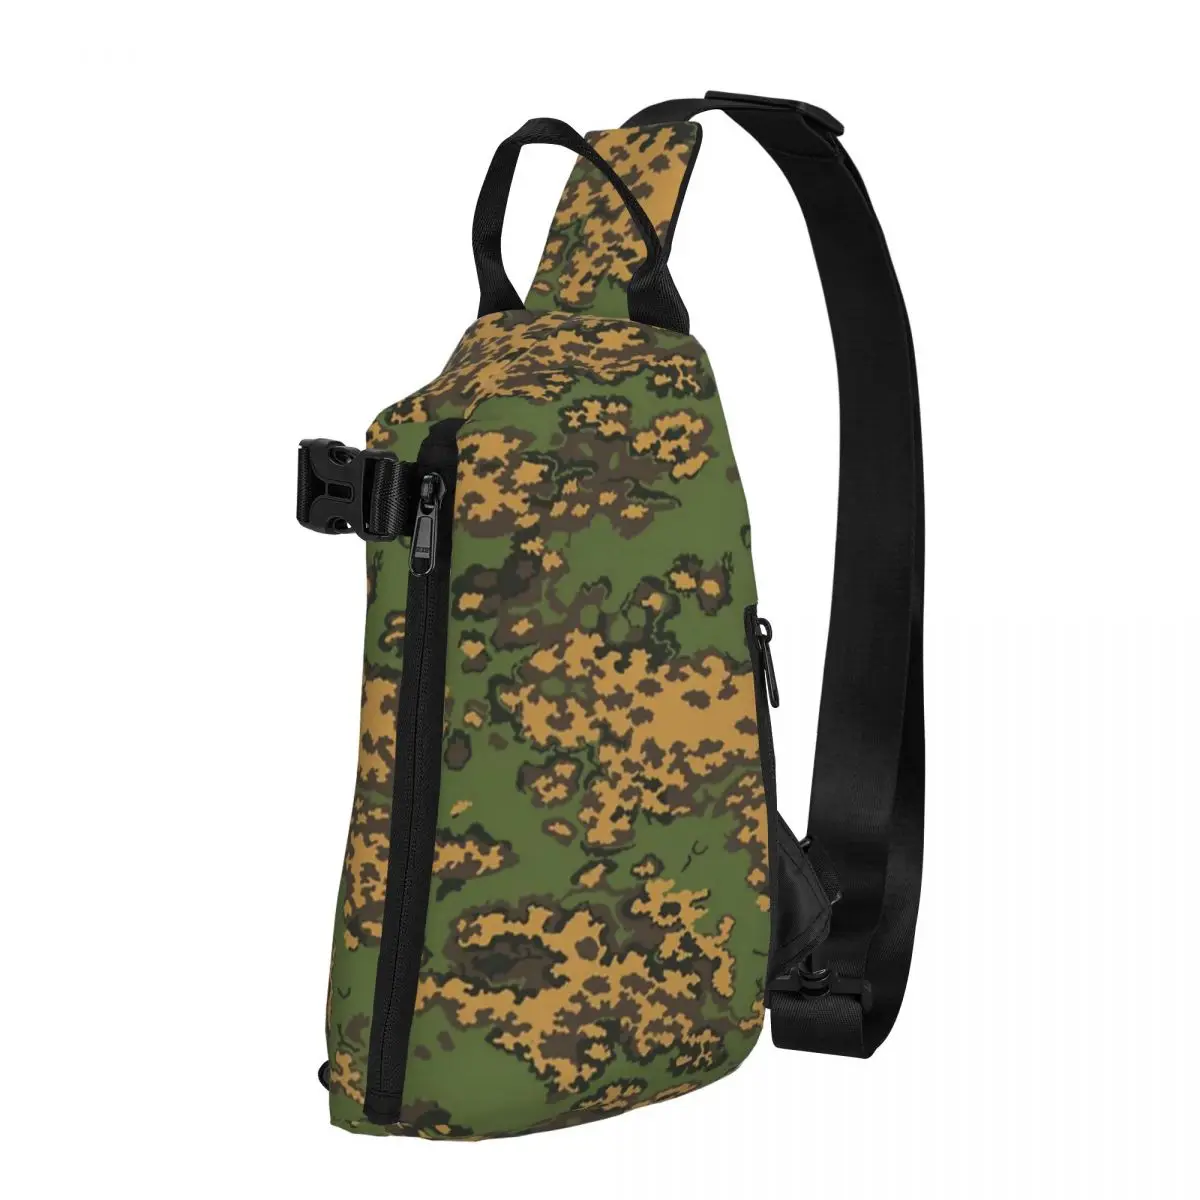 Russian Woodland Camouflage! Russian Camouflage Shoulder Bags Chest Cross Chest Bag Diagonally Casual Messenger Bag